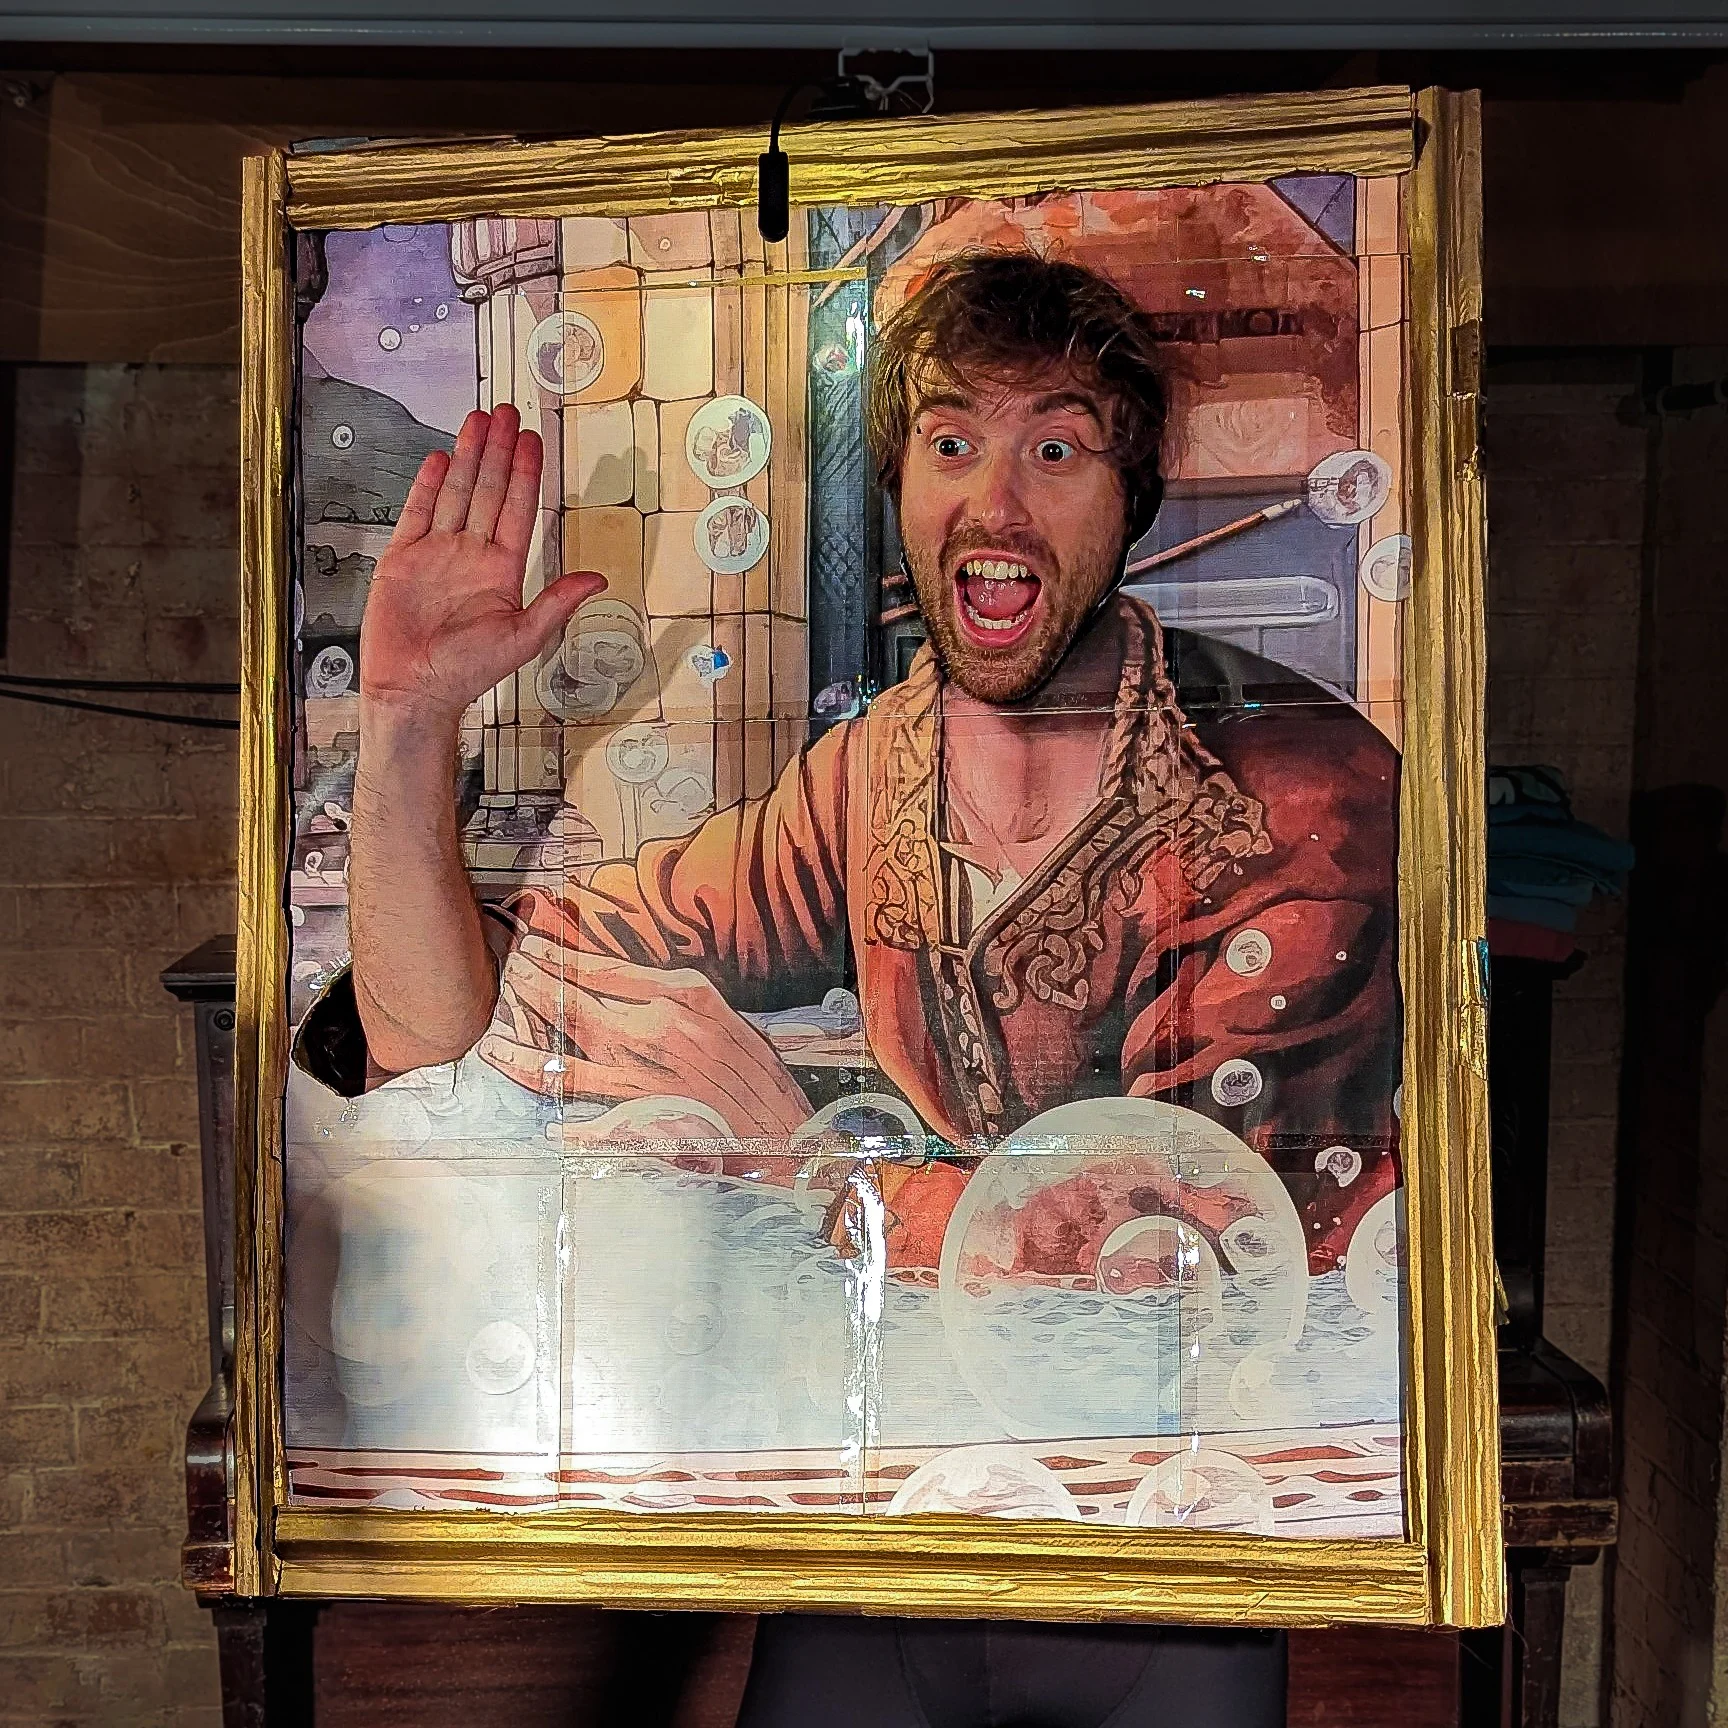 Charlie Jackson is wearing a portrait picture frame as a costume. The portrait is of a man taking a bath at some point in history. Charlie's head and right arm are visible via cut out sections of the portrait.